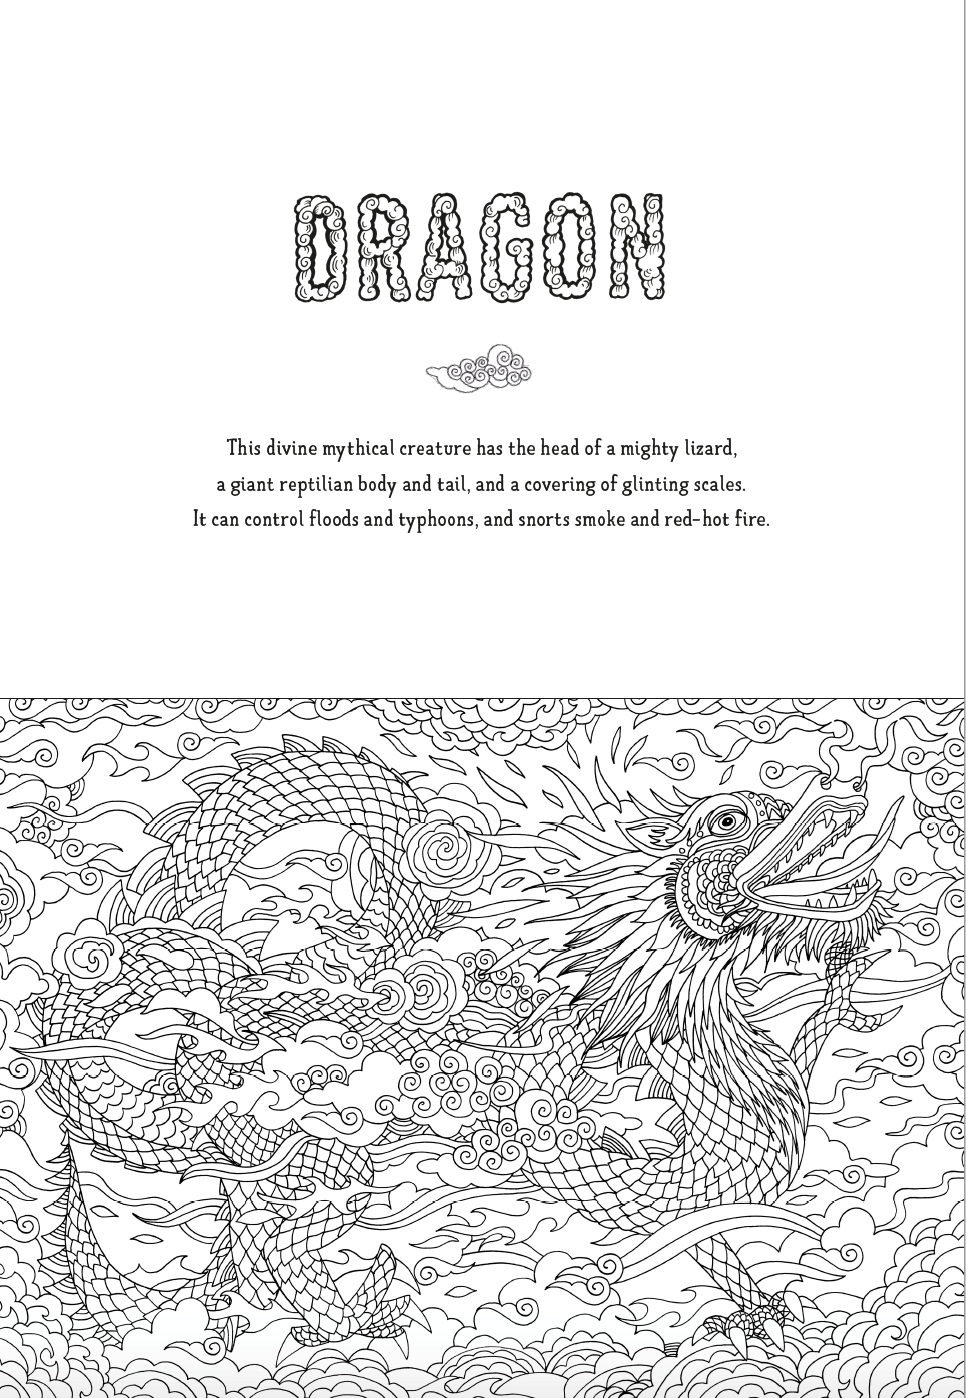 Myth World: Fantastical Beasts to Color and Explore